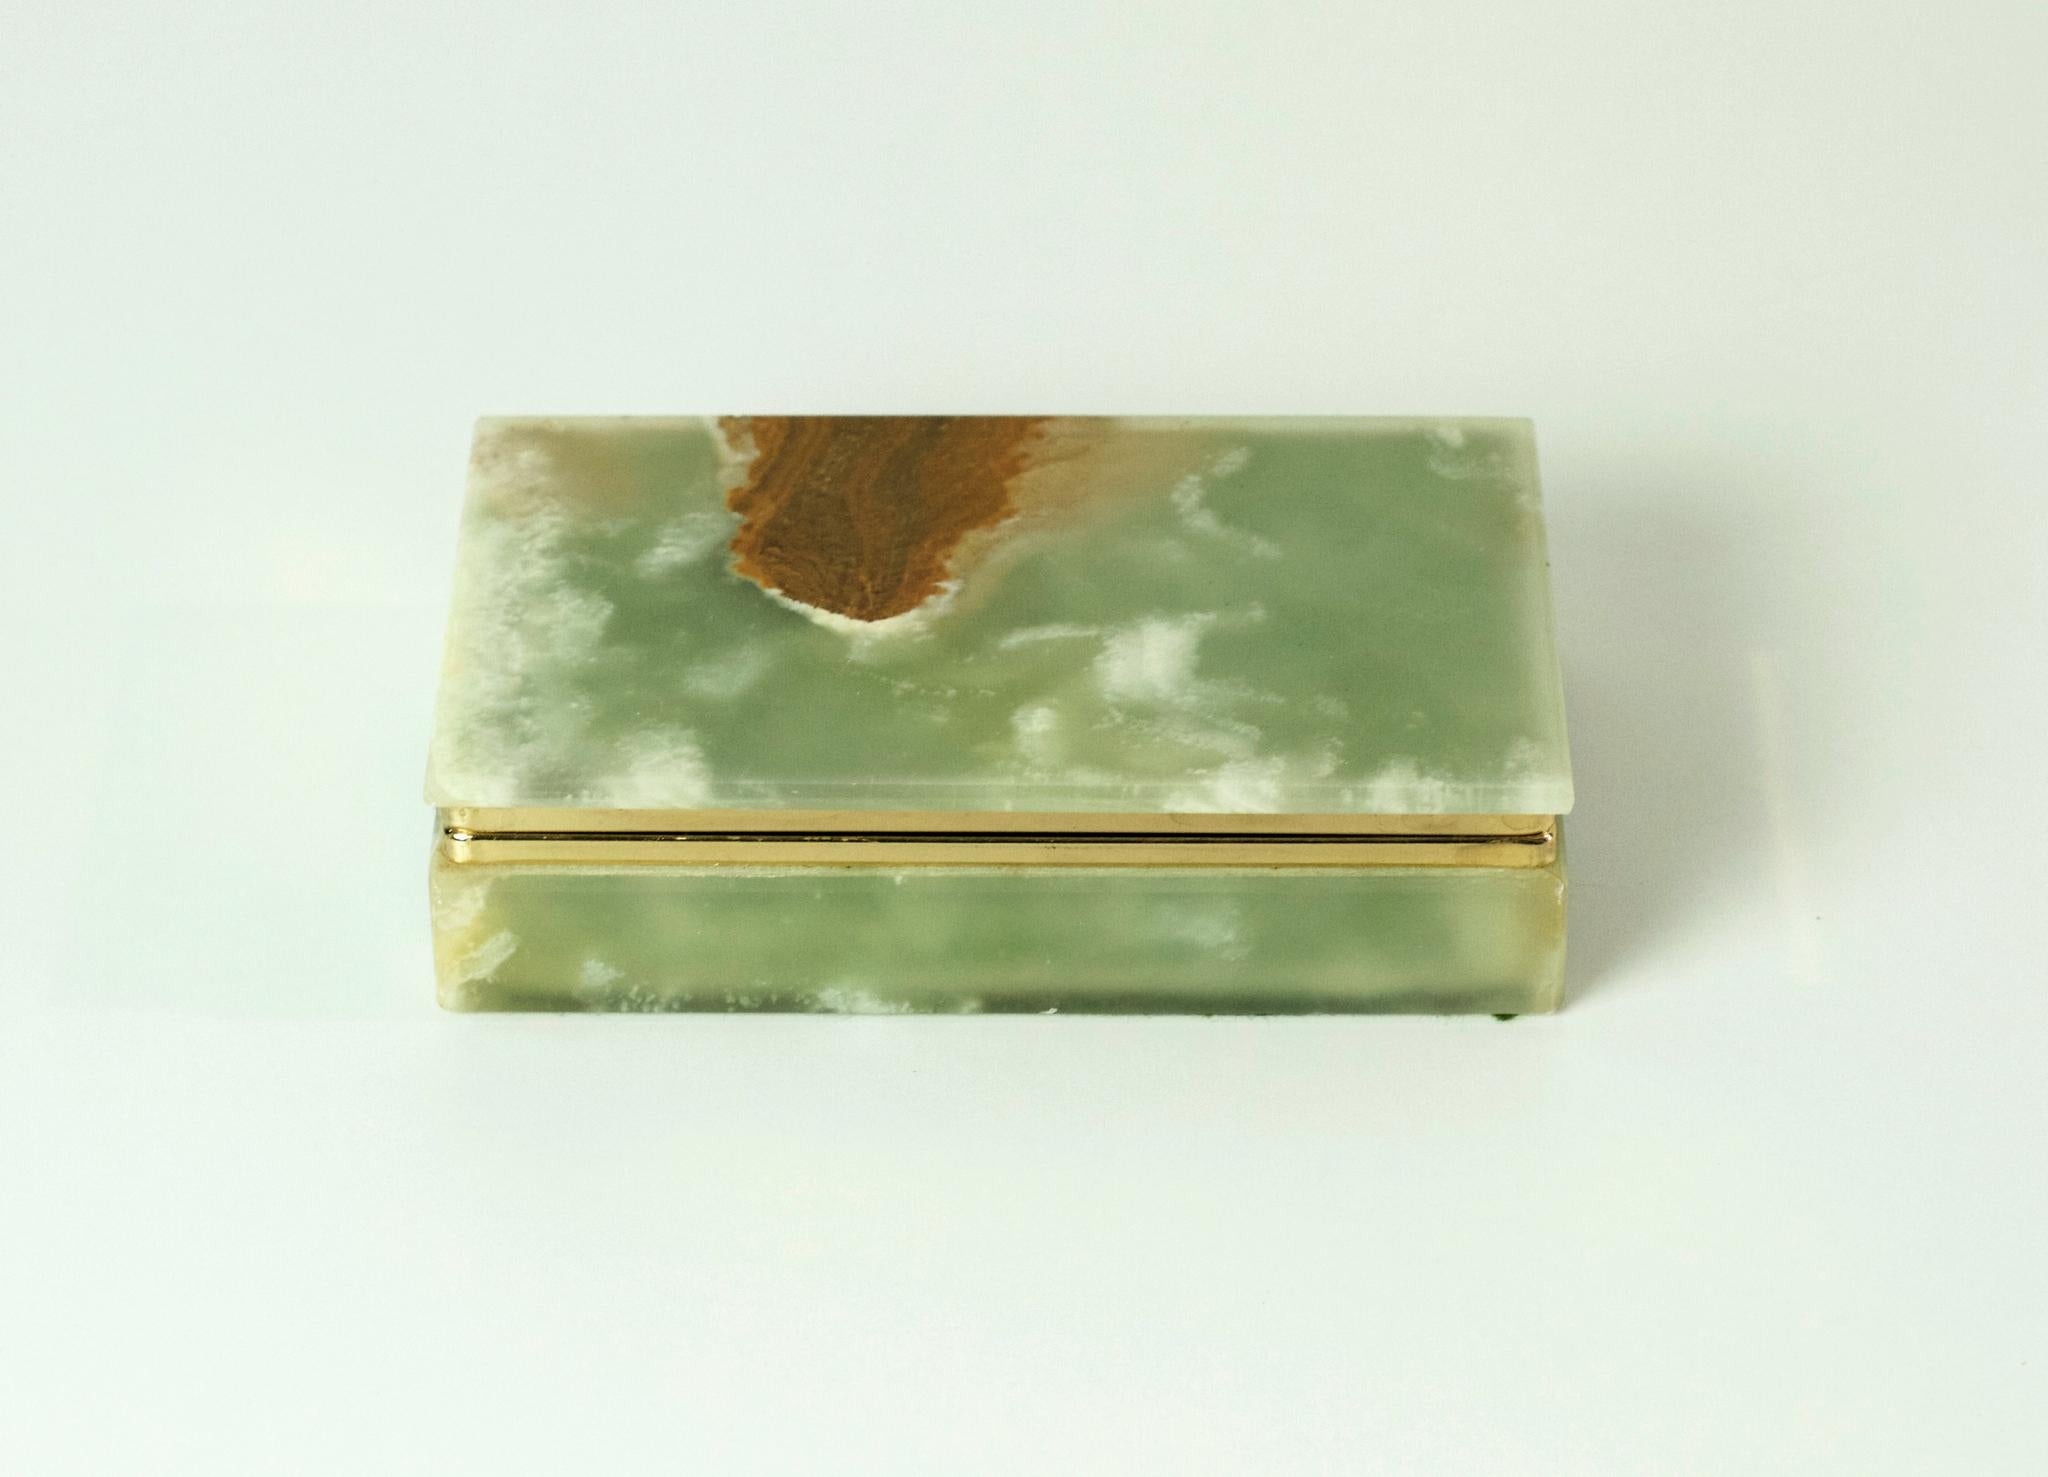 Trinket or jewelry box with a hinged lid. Made all in onyx and brass gilded in gold. The onyx has a range of all natural colors from brown to green which is seen in this piece as well. No chipping or cracks.